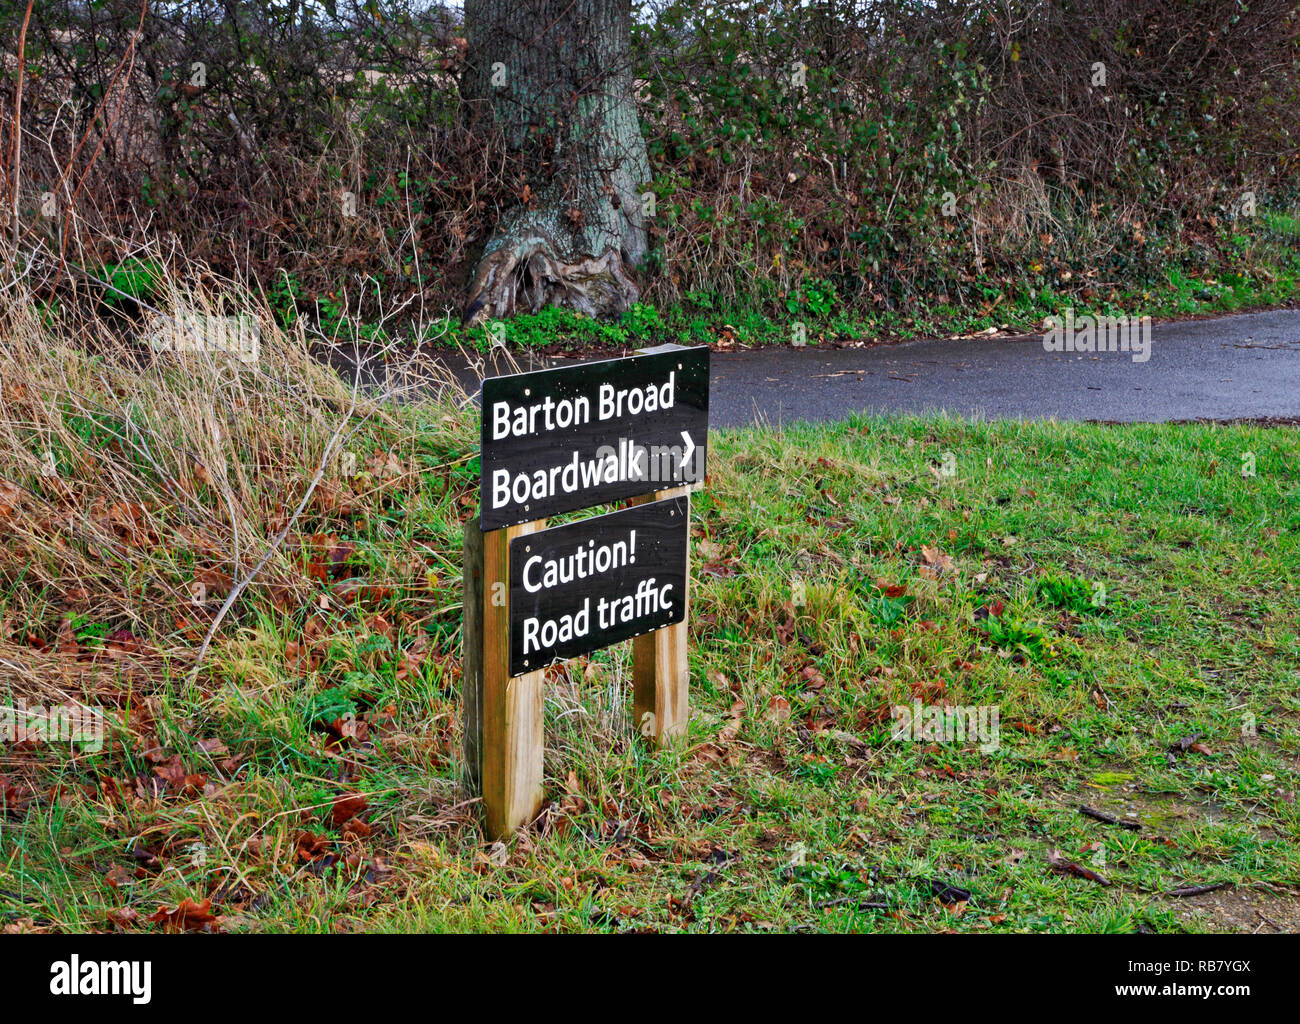 A sign to Barton Broad Boardwalk at the exit of a footpath to a country road in the Norfolk Broads at Neatishead, Norfolk, England, UK, Europe. Stock Photo